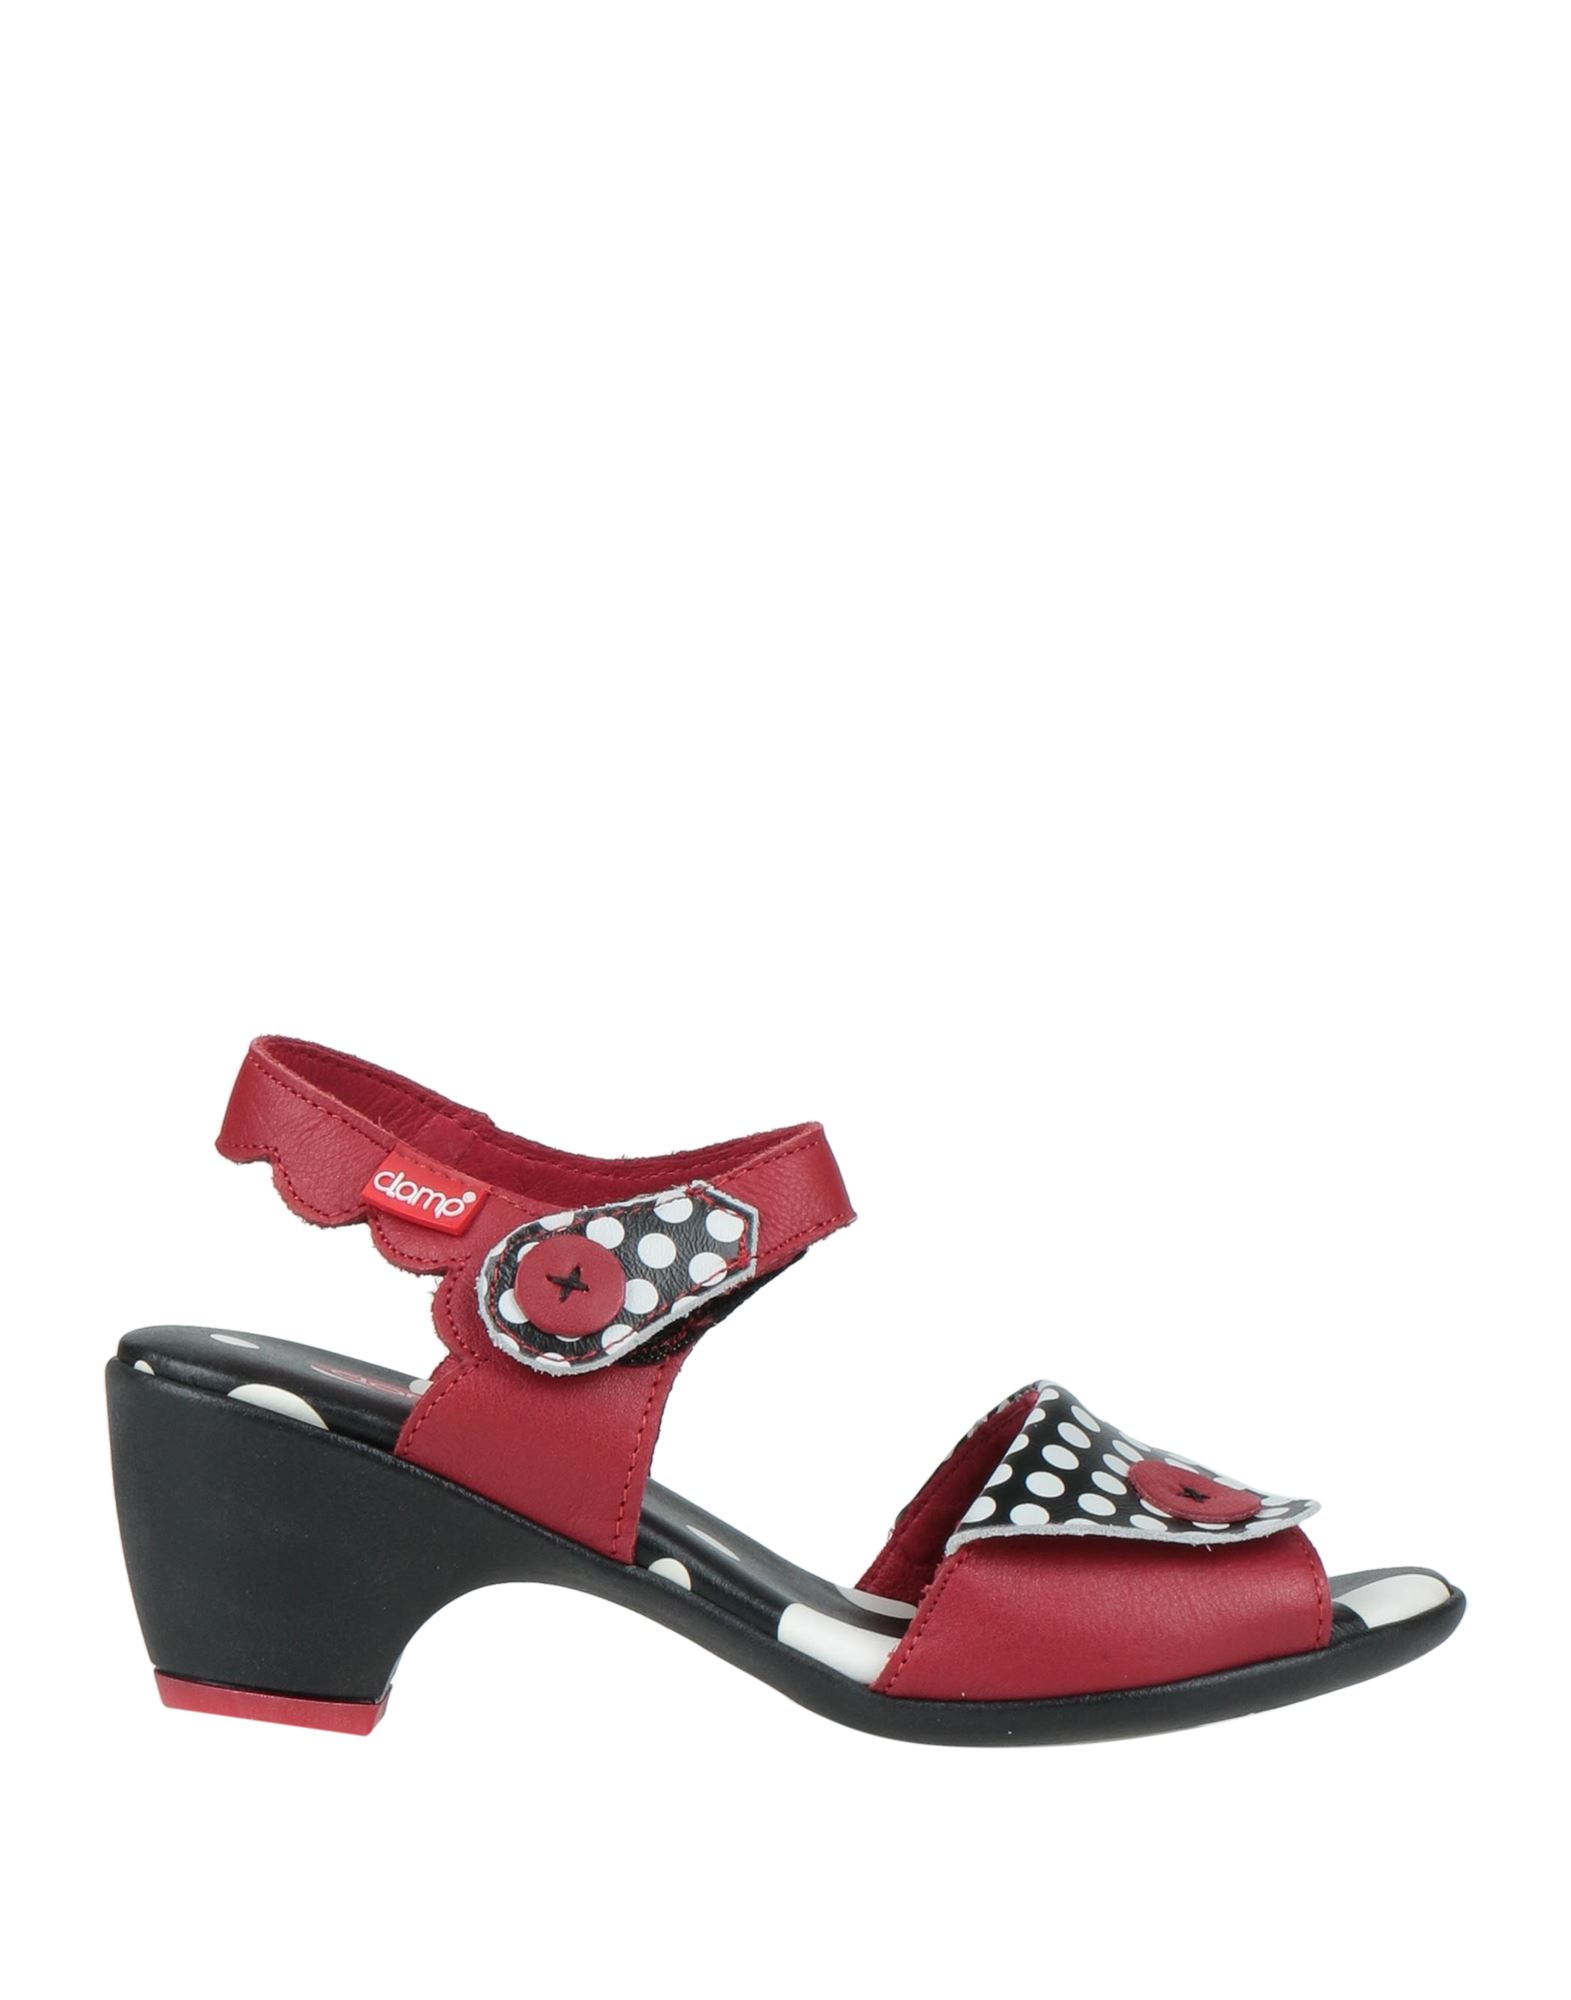 Clamp Sandals In Brick Red